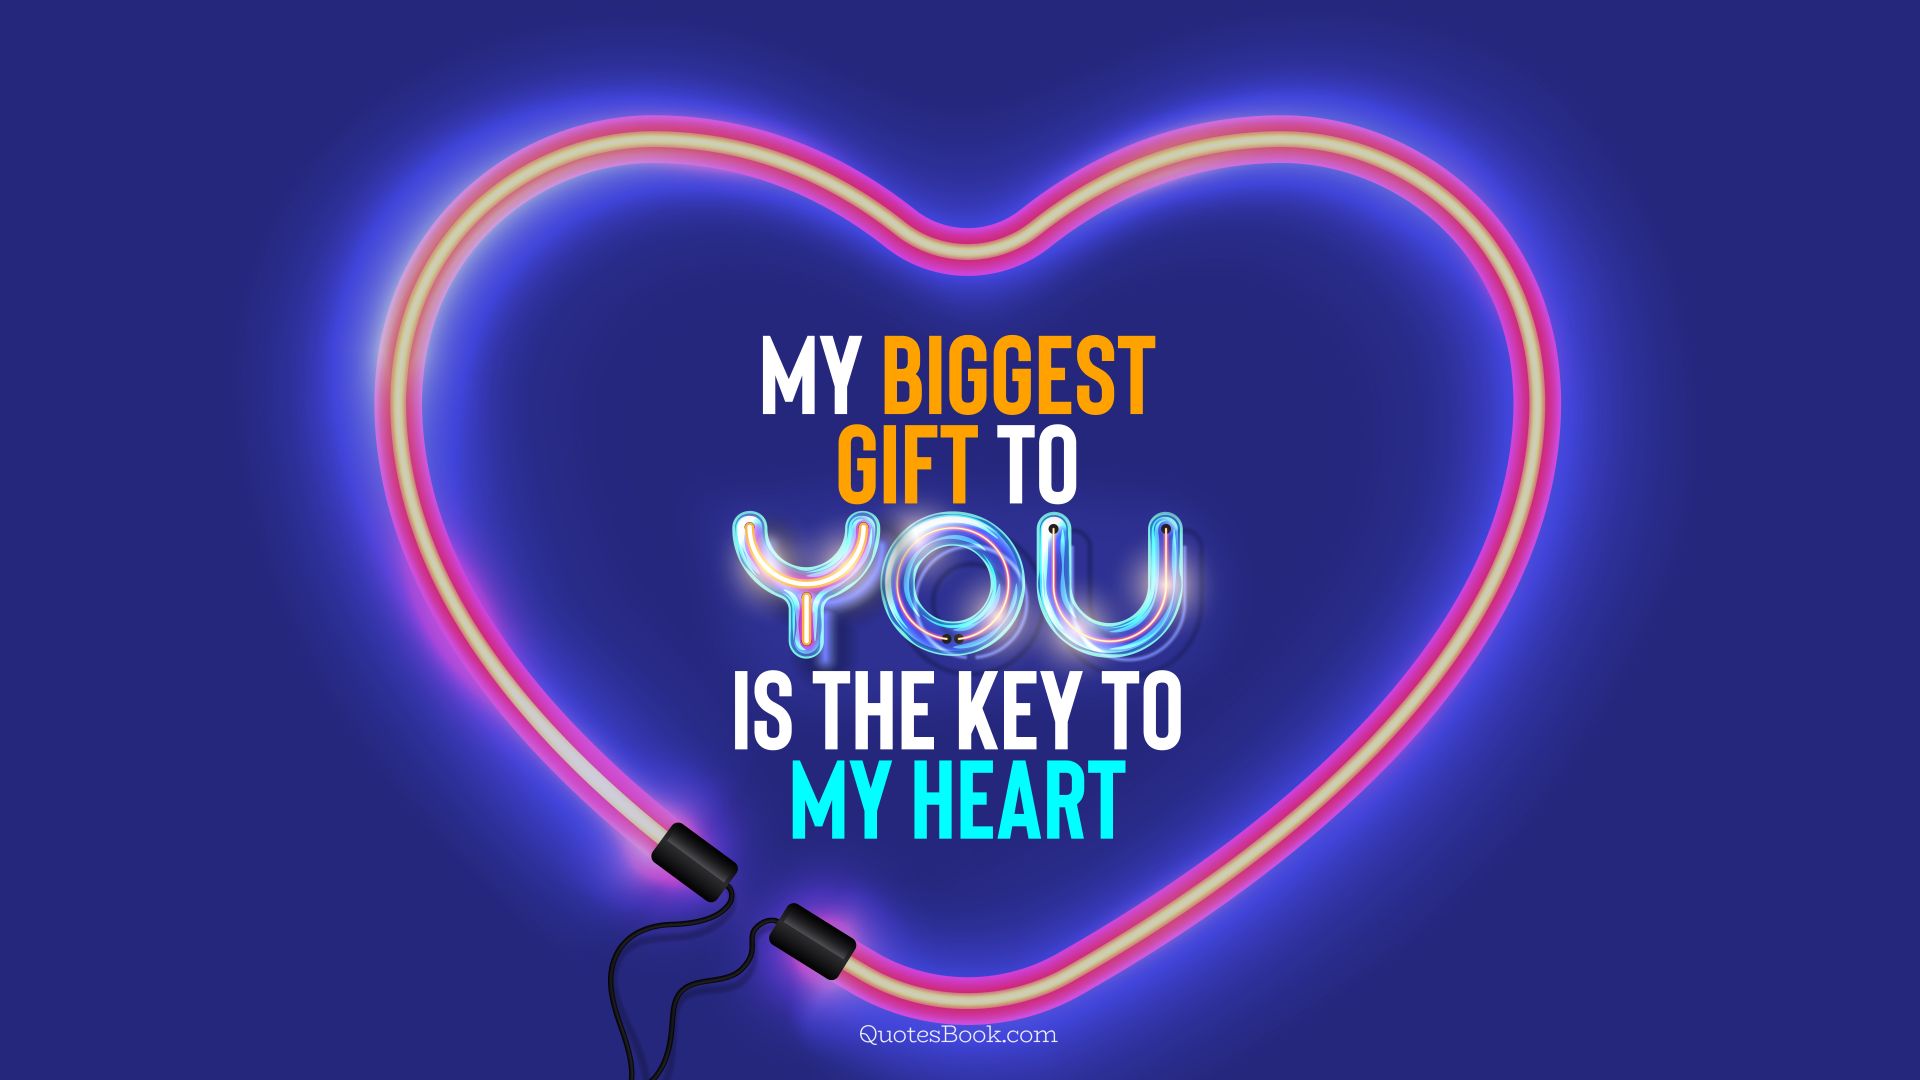 My biggest gift to you is the key to my heart. - Quote by QuotesBook